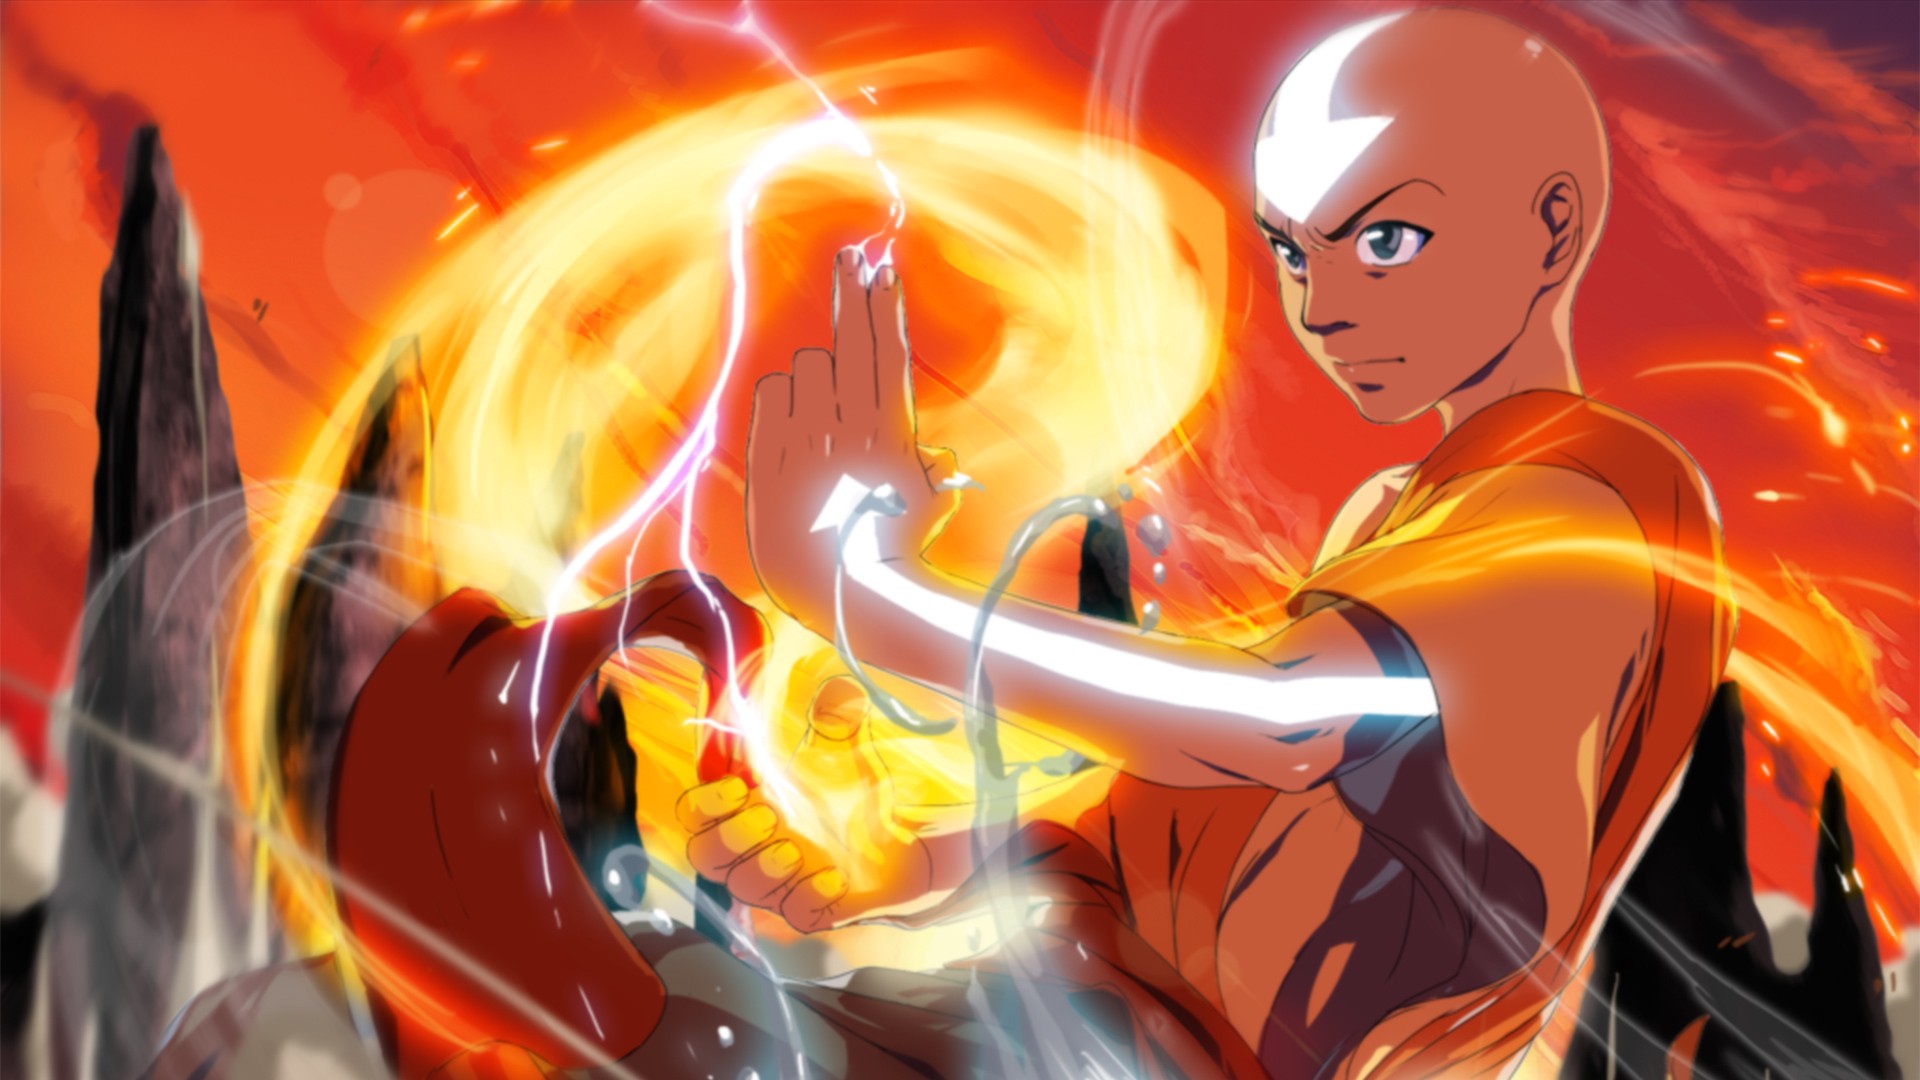 Drawing Custom Avatar the Last Airbender Style With Your Face - Etsy